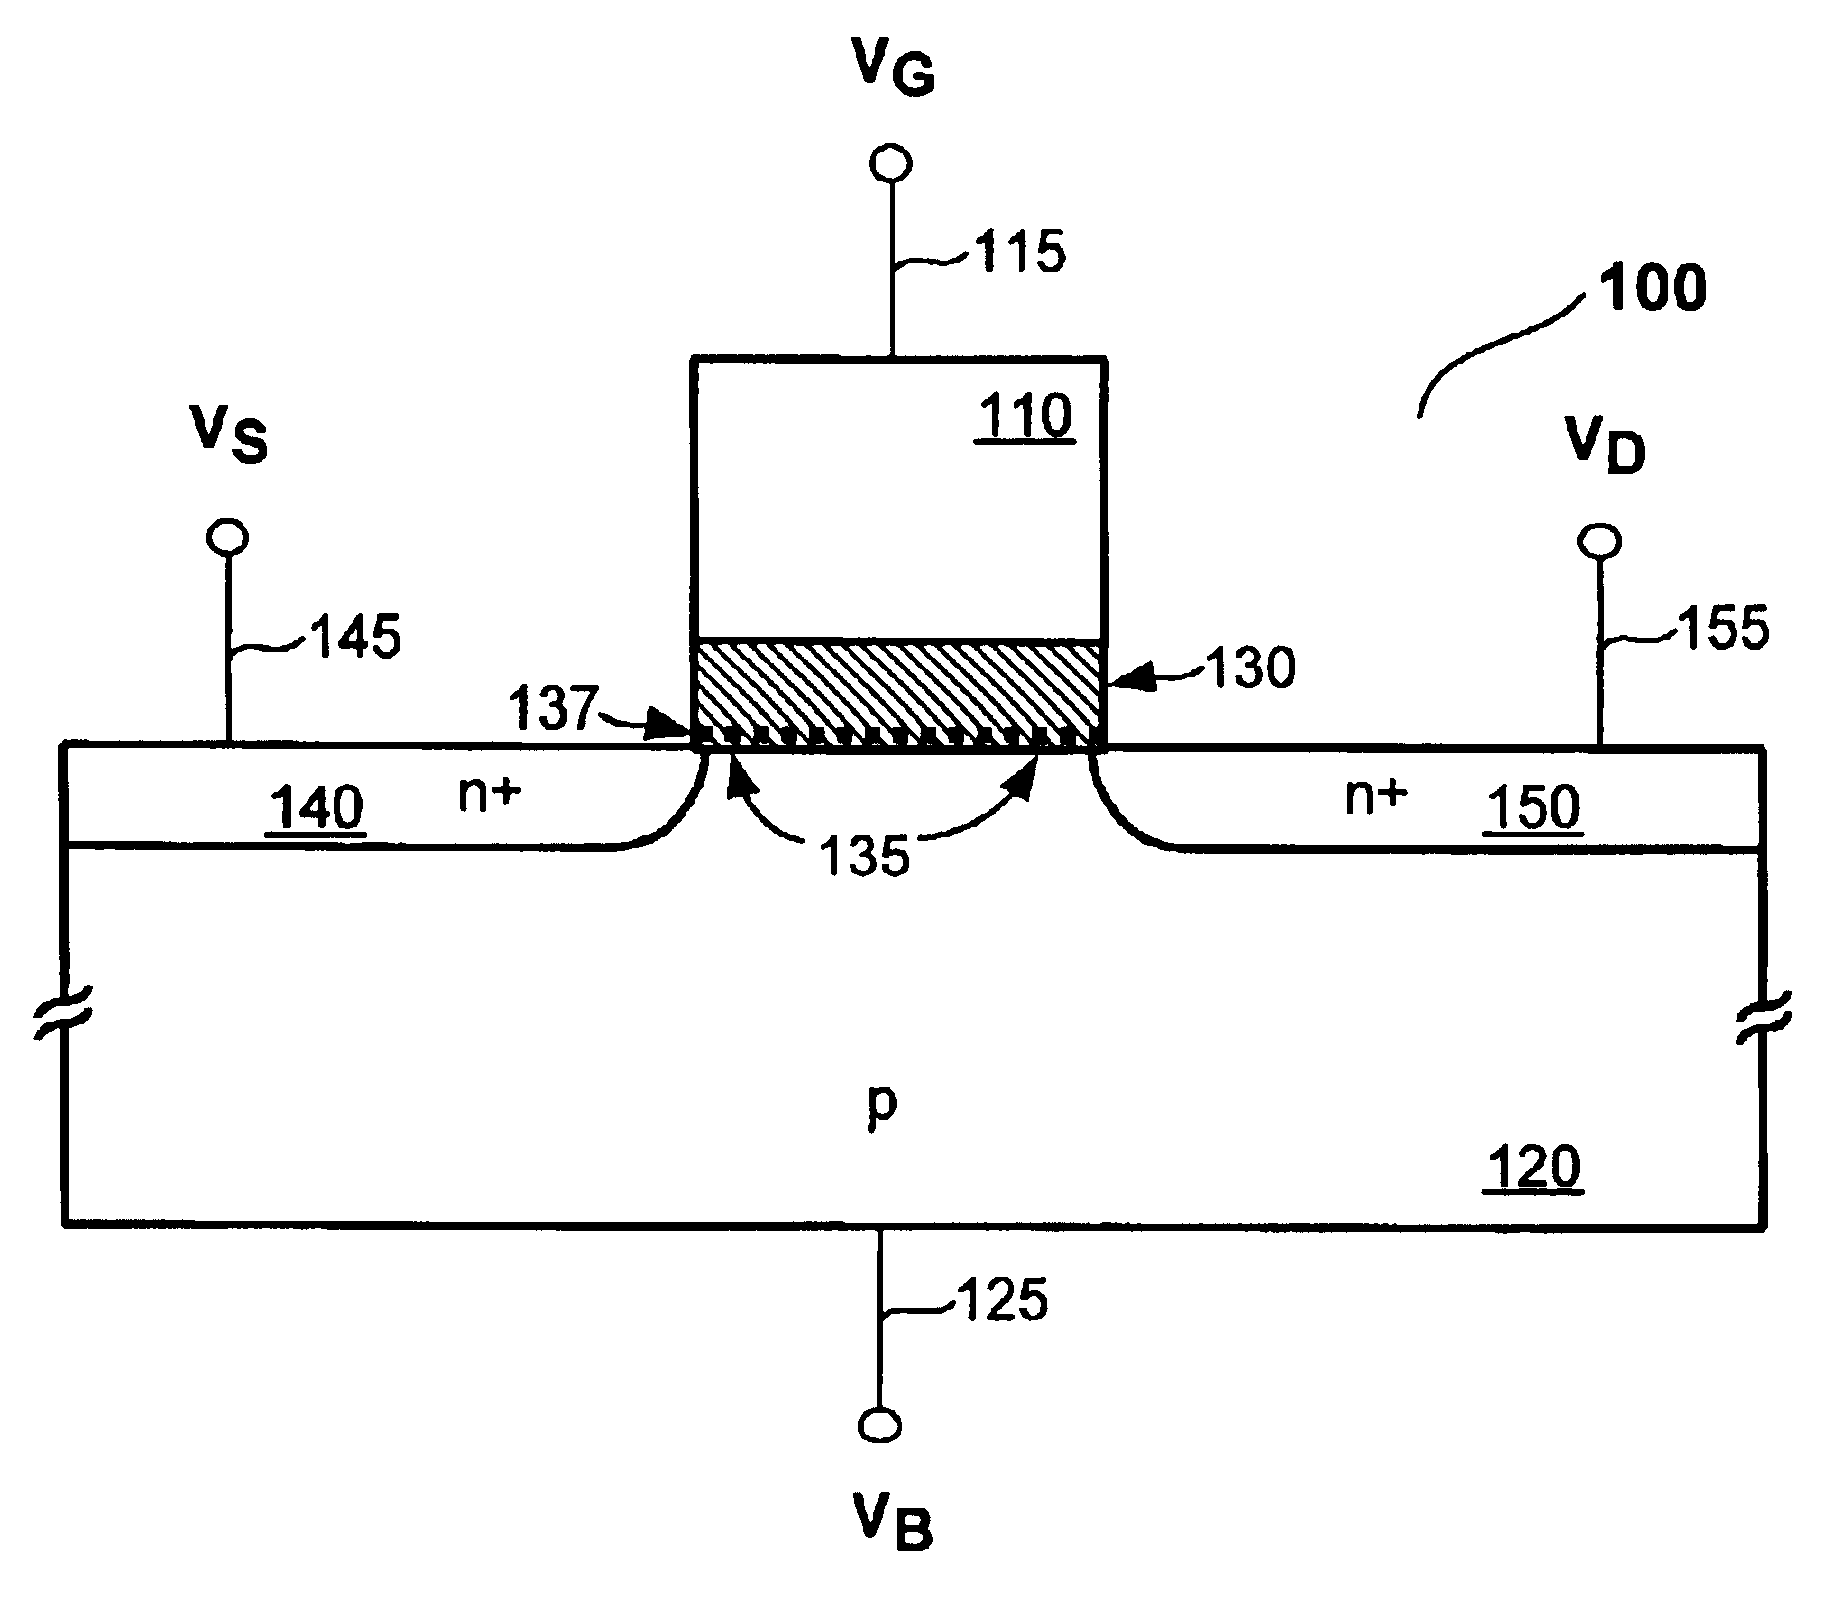 Process for controlling performance characteristics of a negative differential resistance (NDR) device